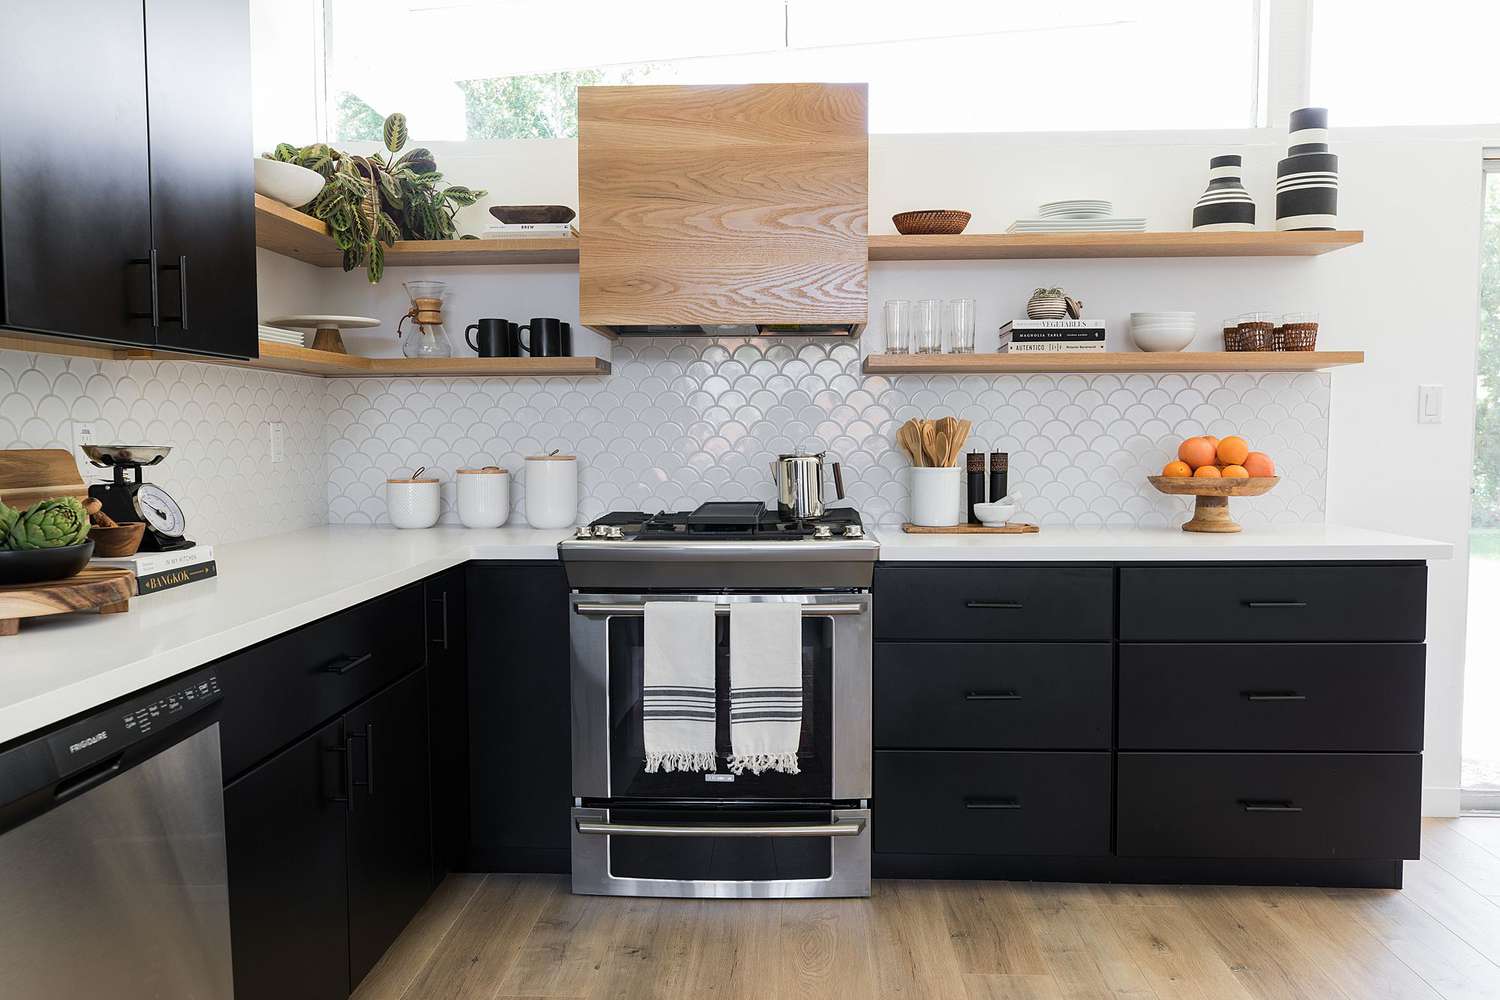 black kitchen with silver appliances, shelves and wooden floor